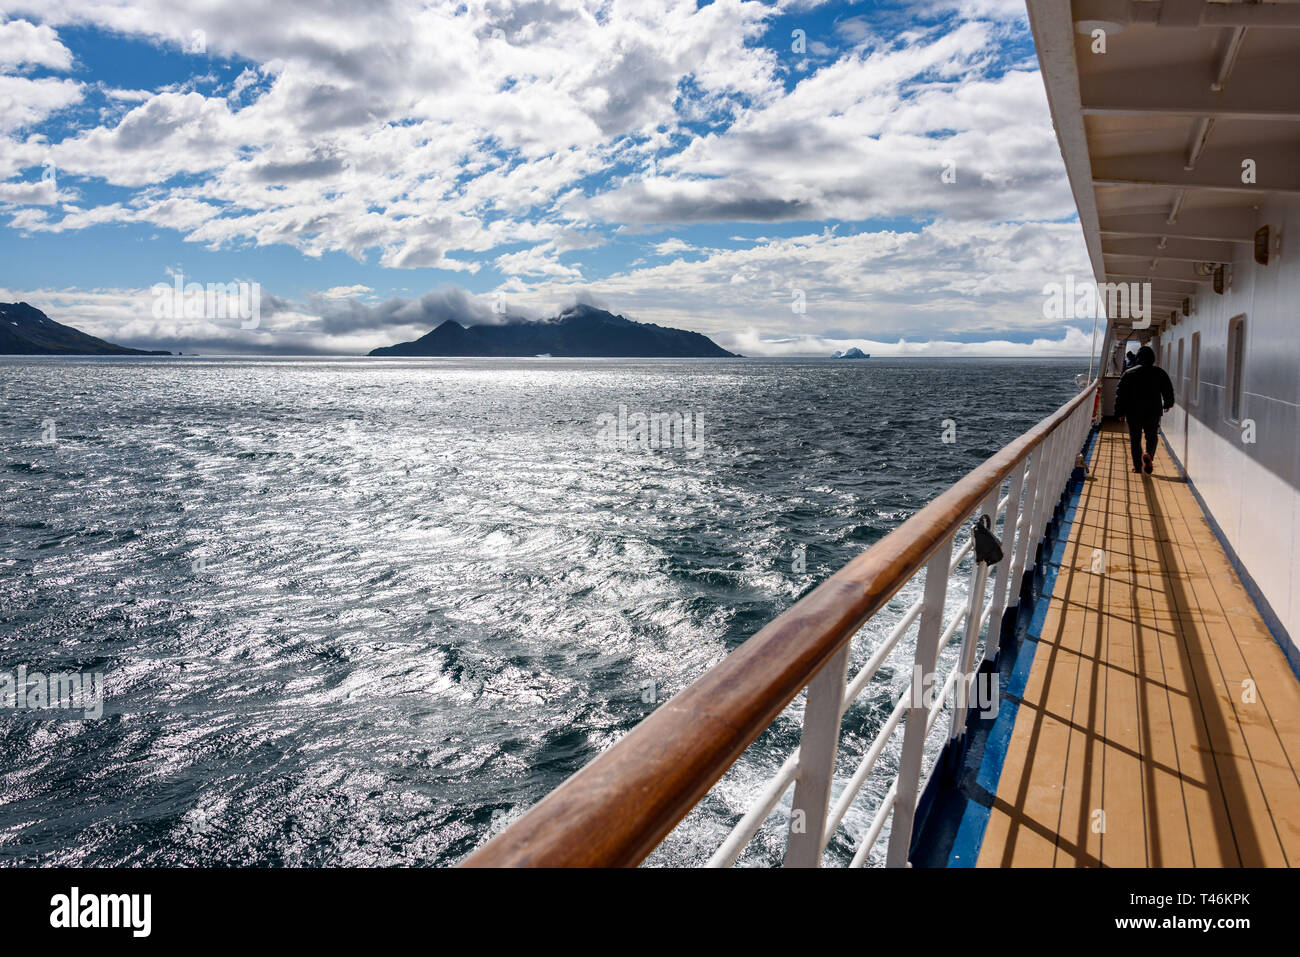 View of South Georgia early on a cloudy day from outside deck of cruise ship, Atlantic Ocean Stock Photo